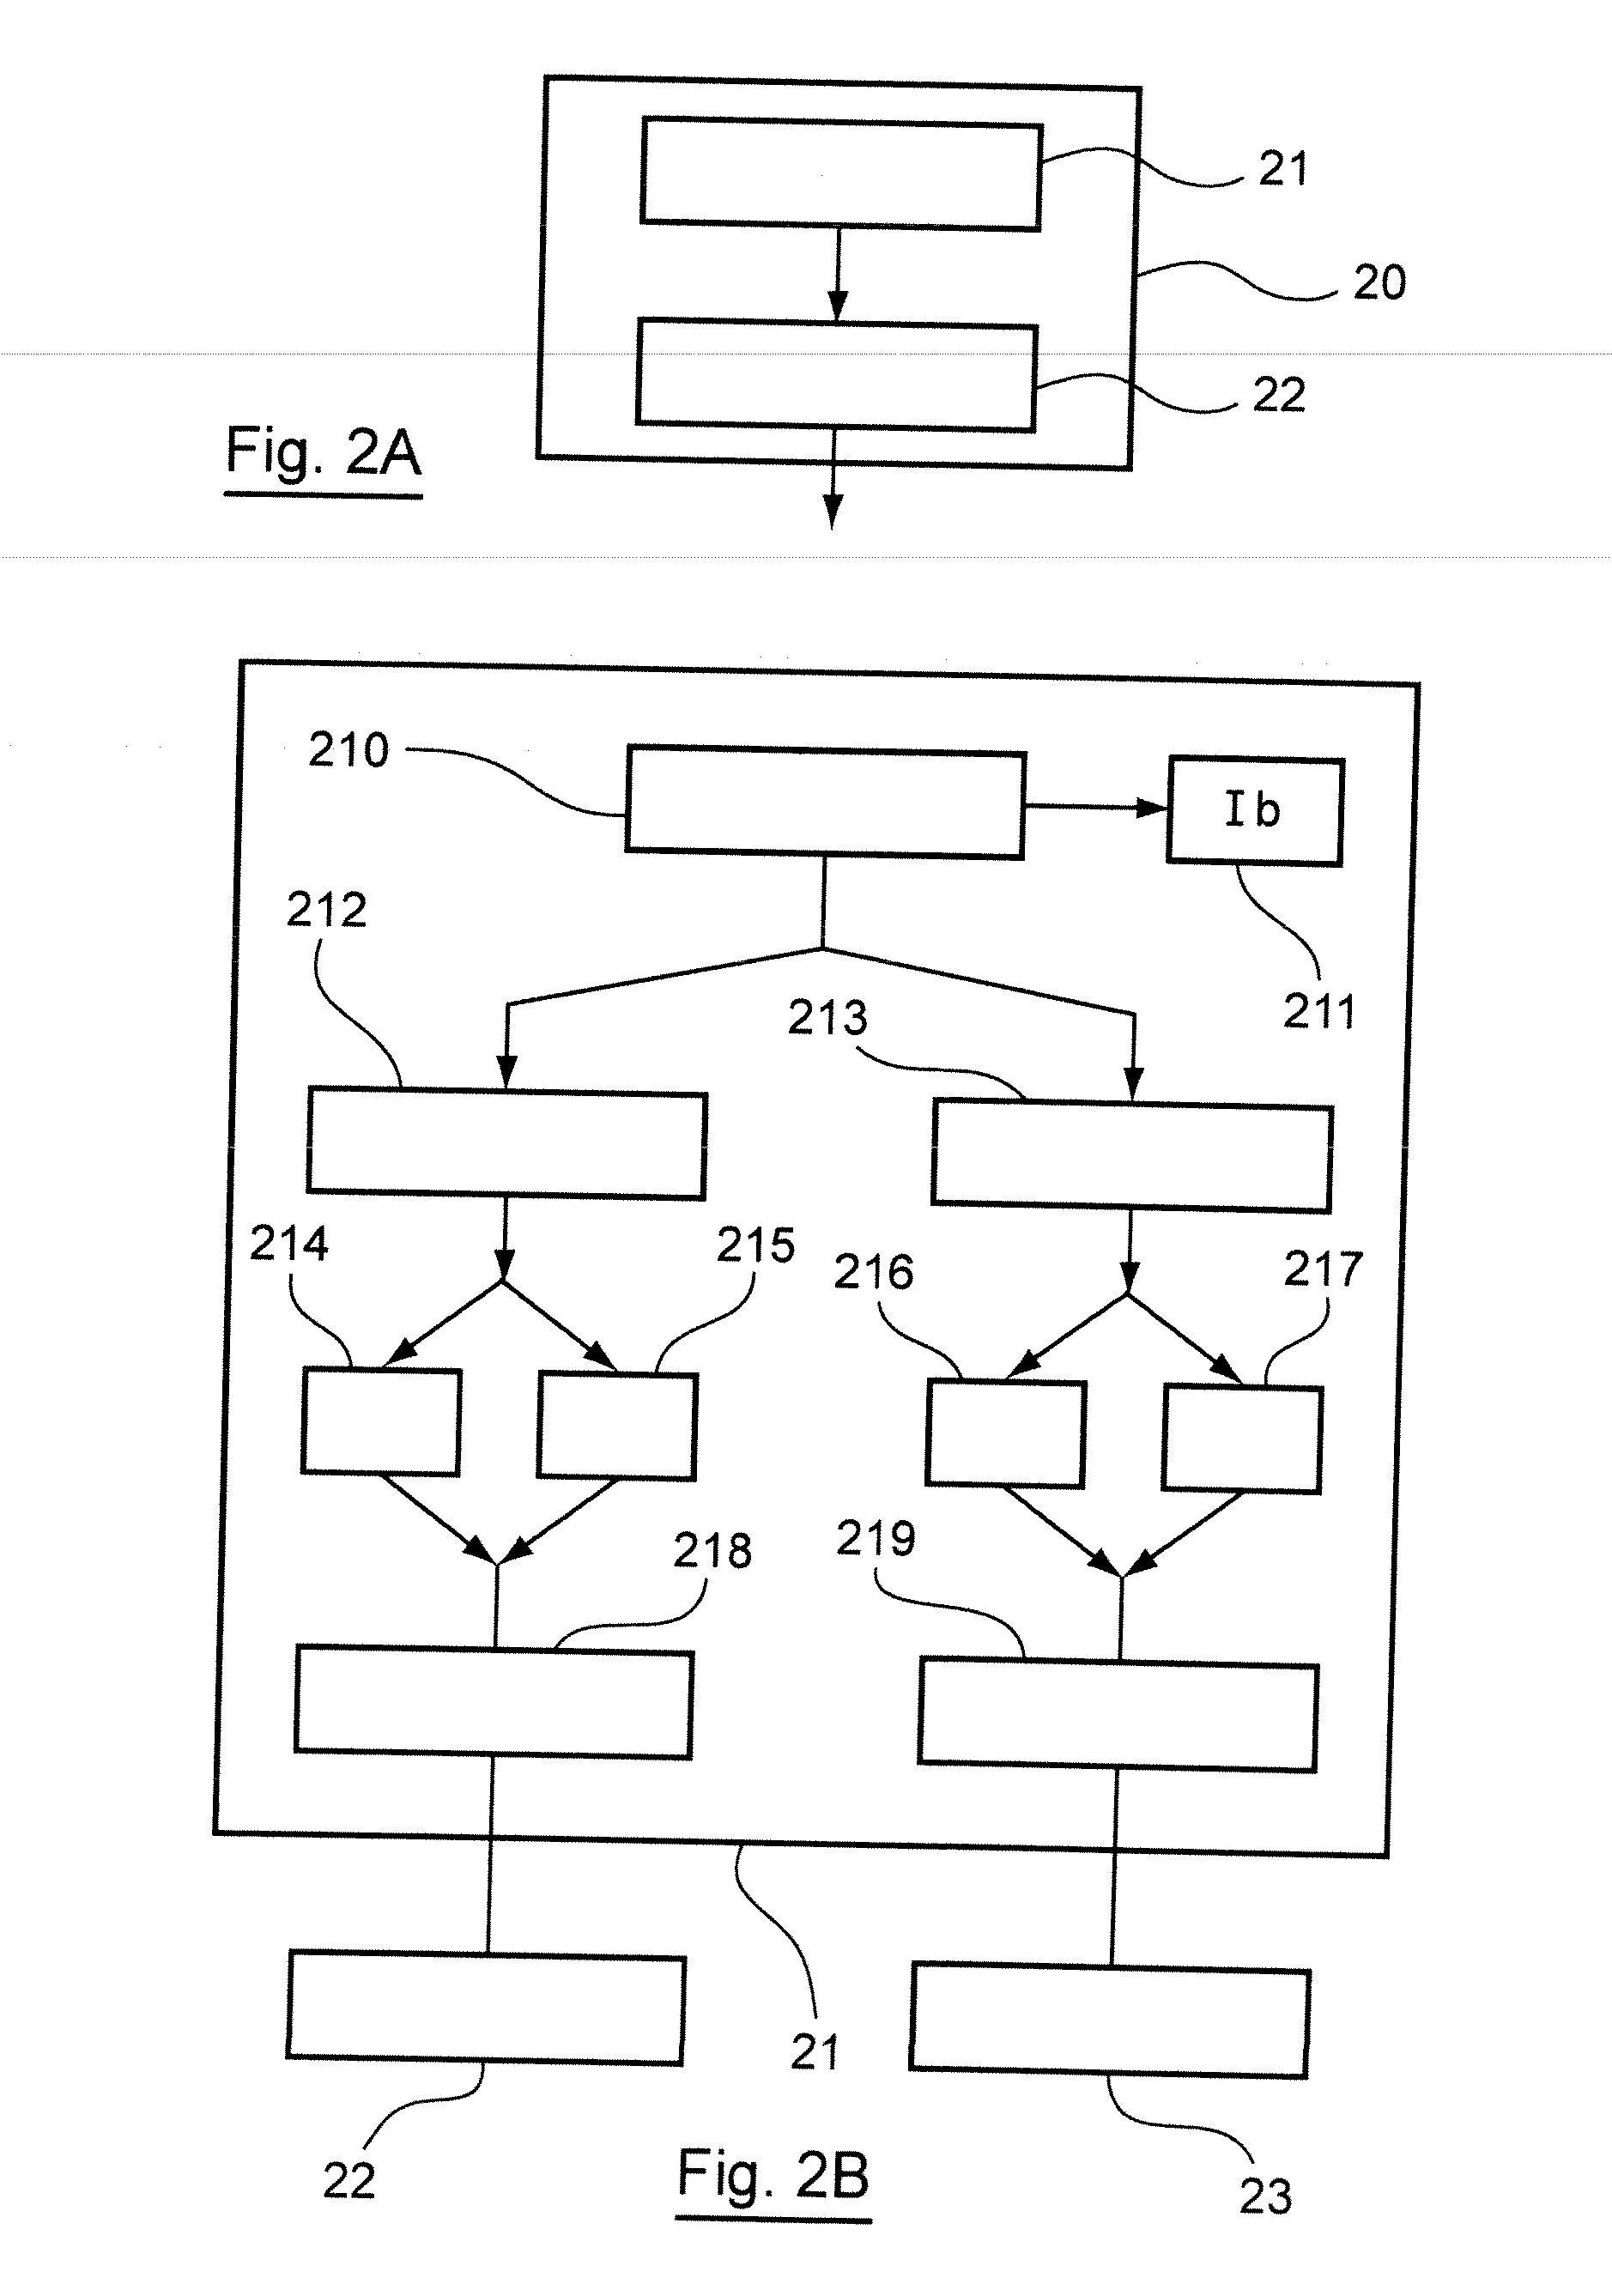 Peak-to-average power ratio reduction in a multicarrier signal